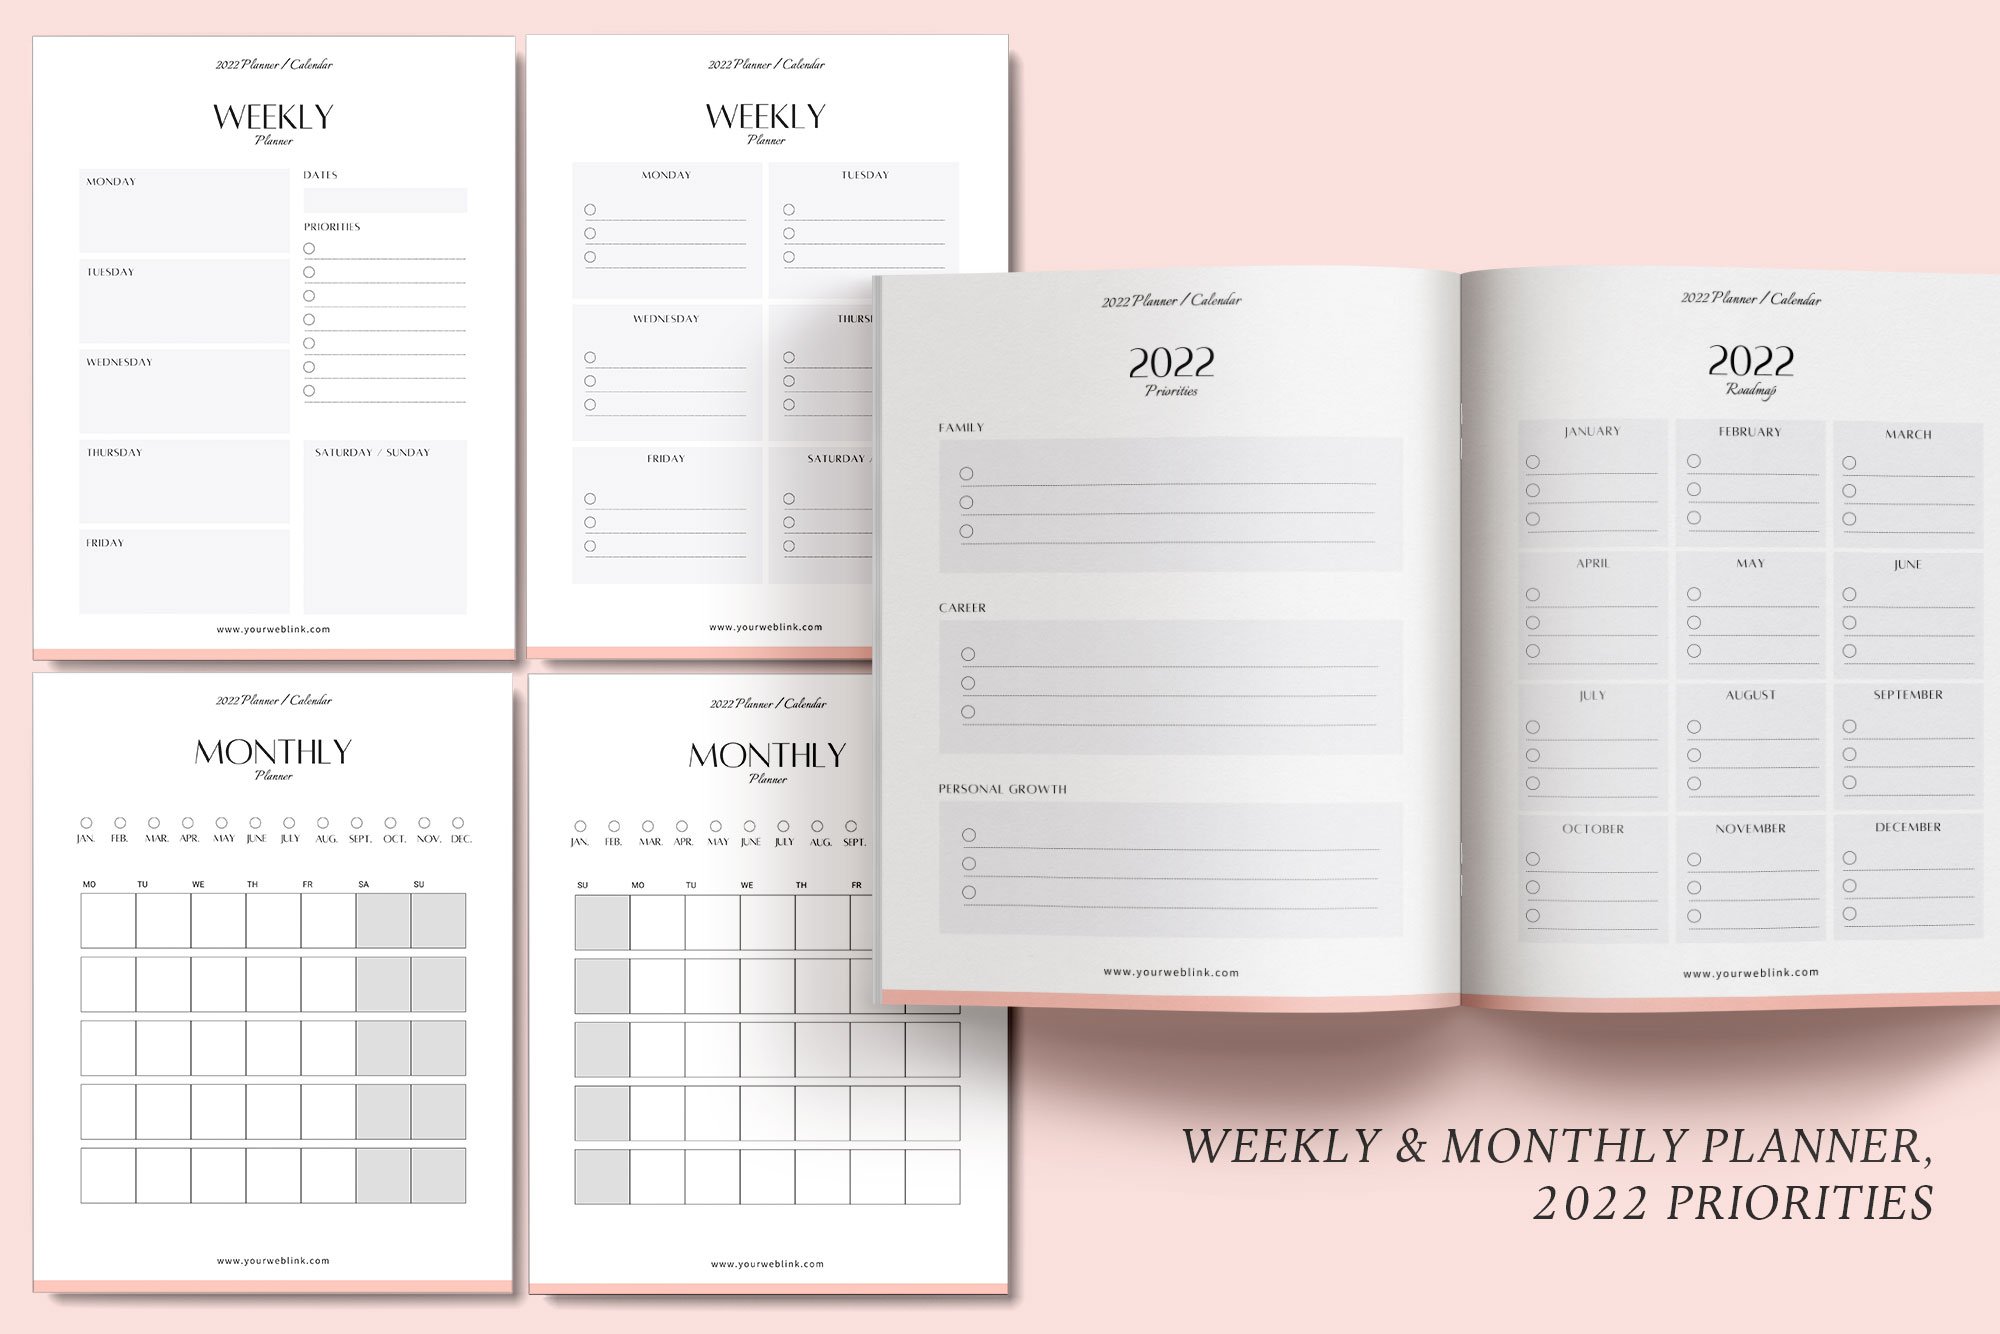 Book planner for the big goals.